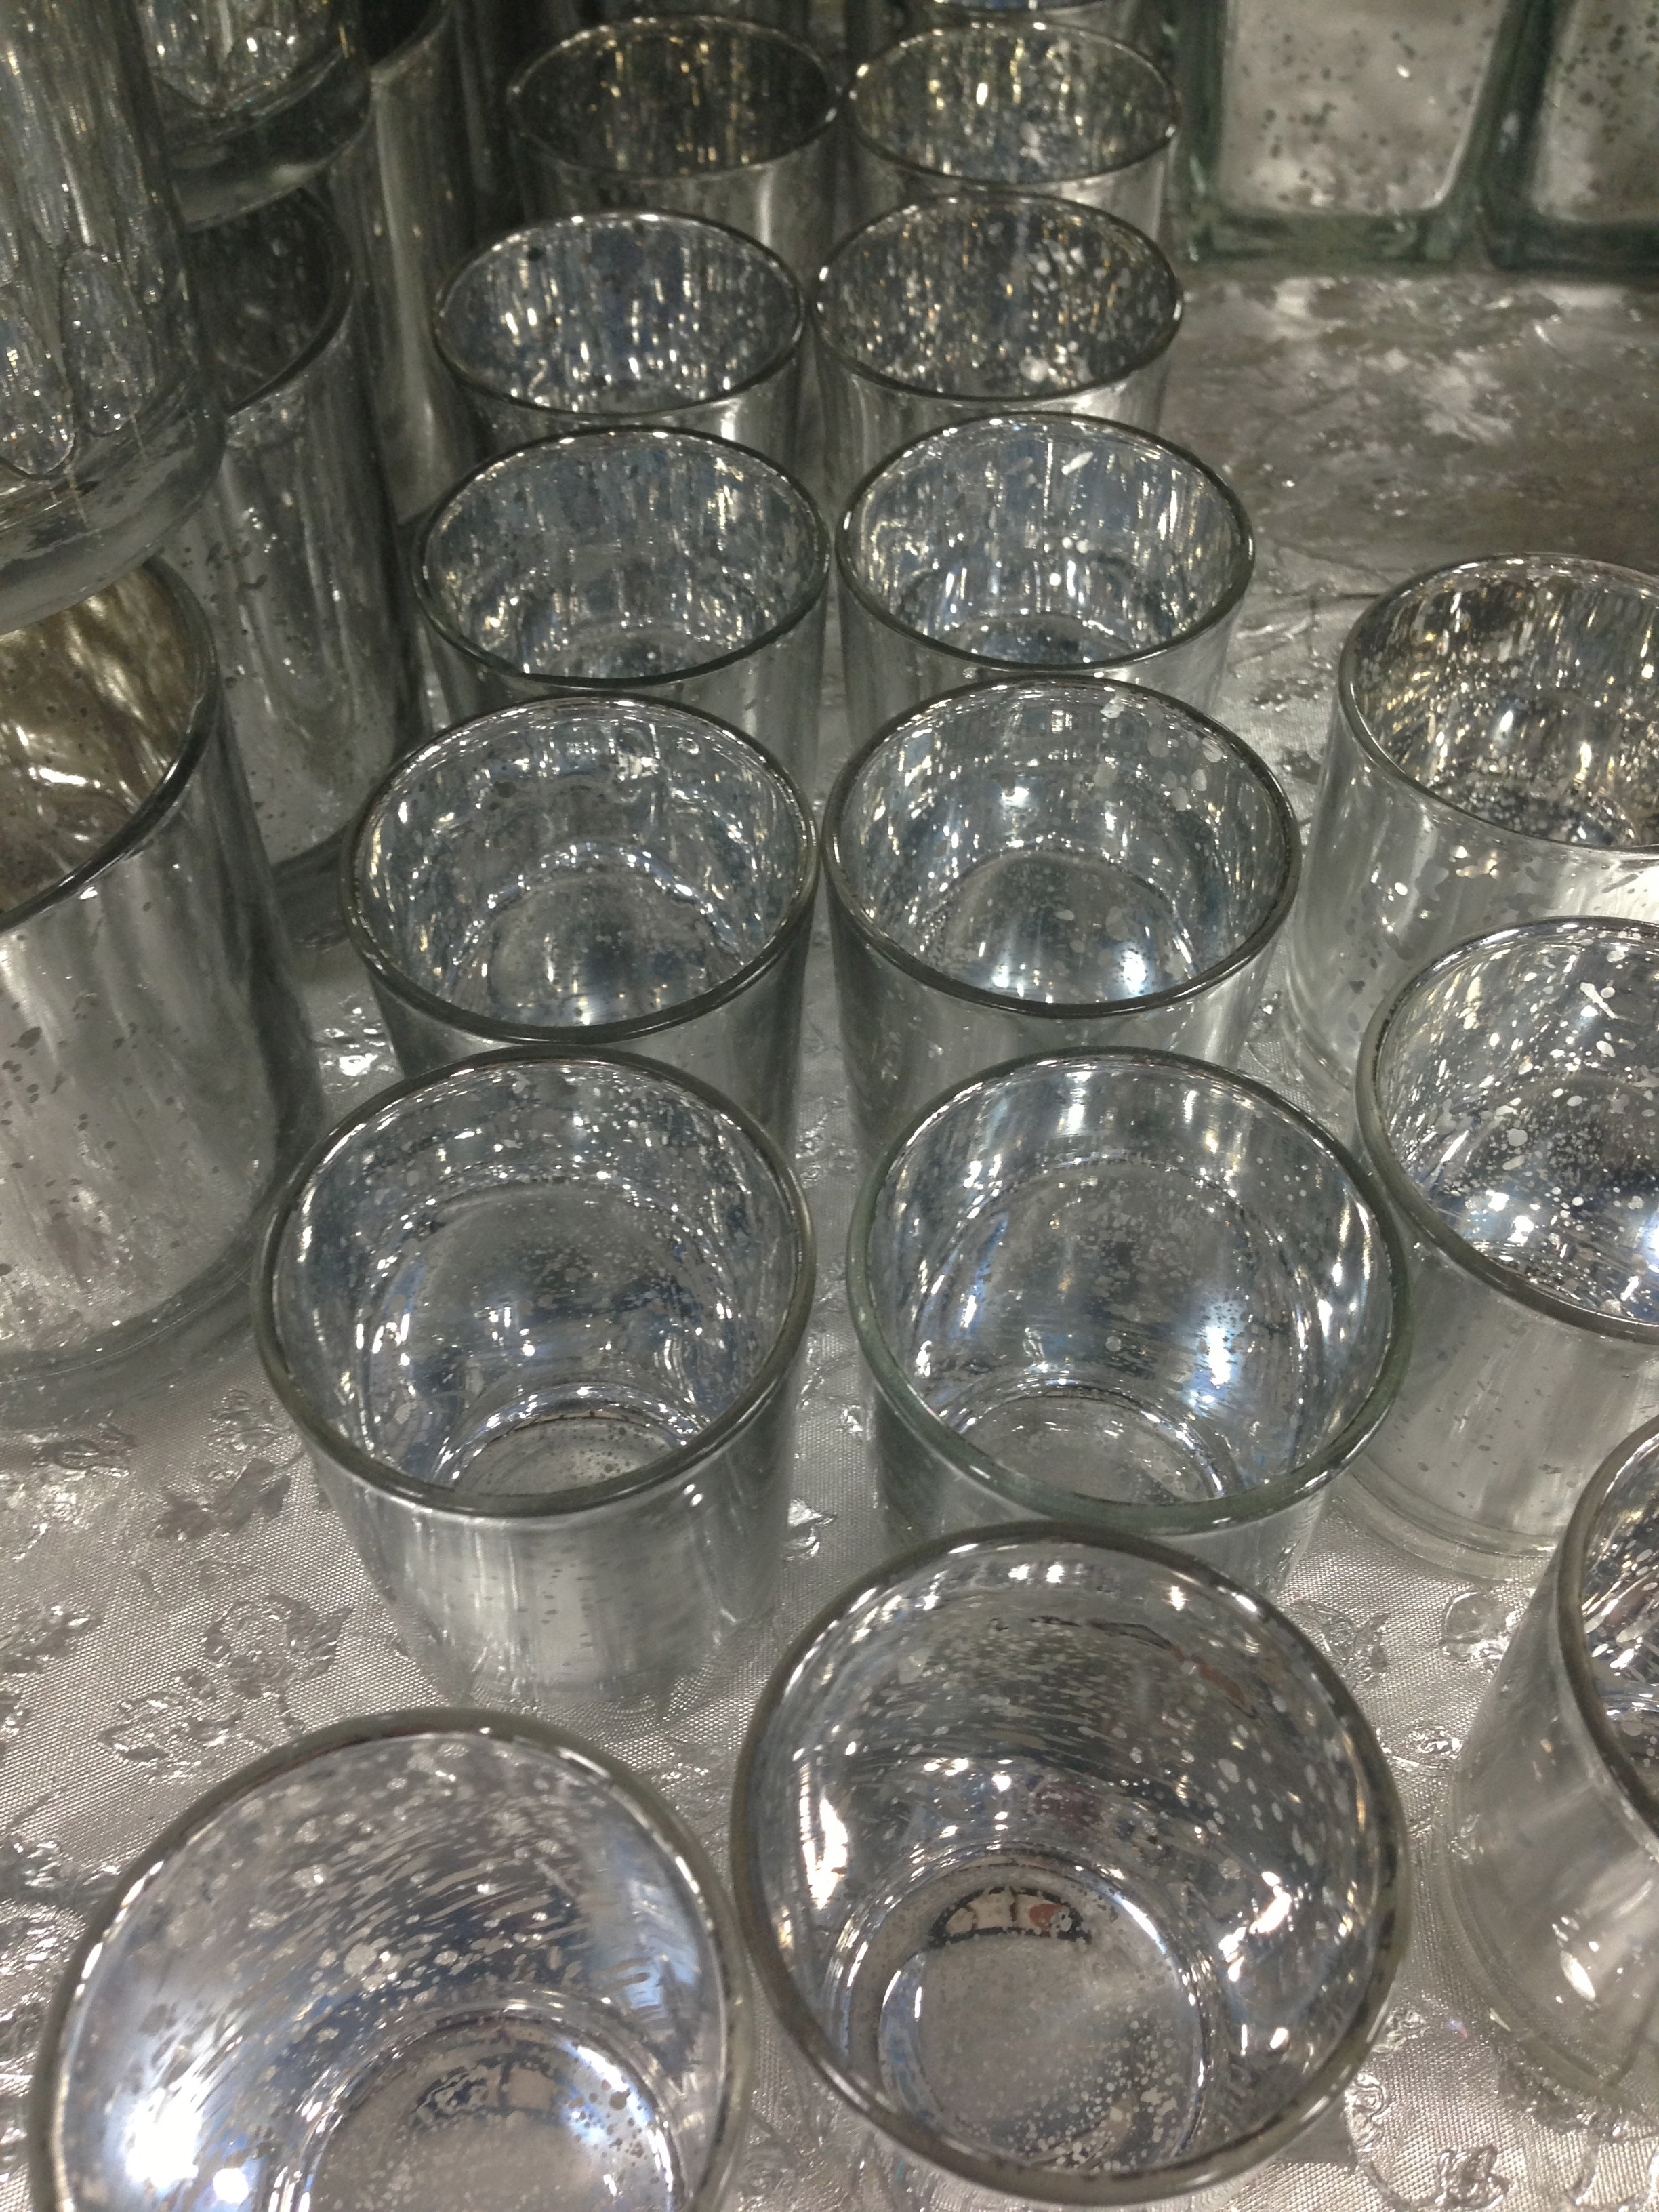 12 Famous Gold Mercury Glass Vases Bulk 2024 free download gold mercury glass vases bulk of vases design ideas mercury glass vases wholesale awesome mercury intended for mercury glass vases wholesale julep cups and mercuries glasses vase at wholesal